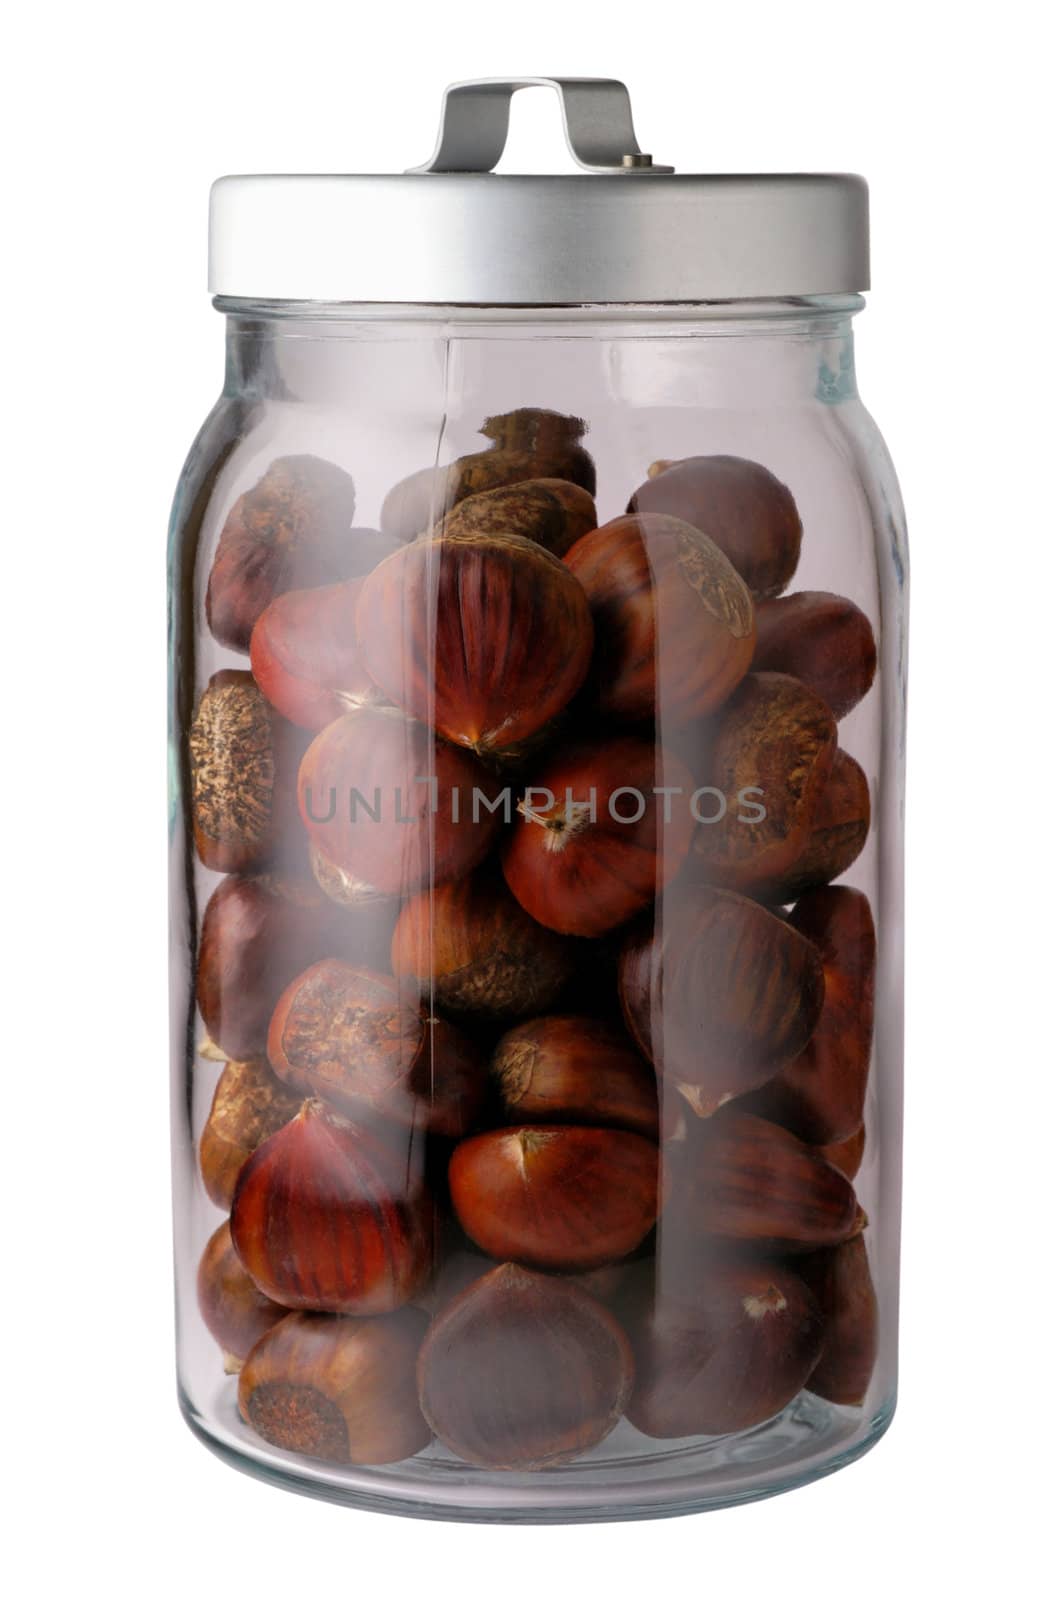 Chestnuts in a jar by Laborer